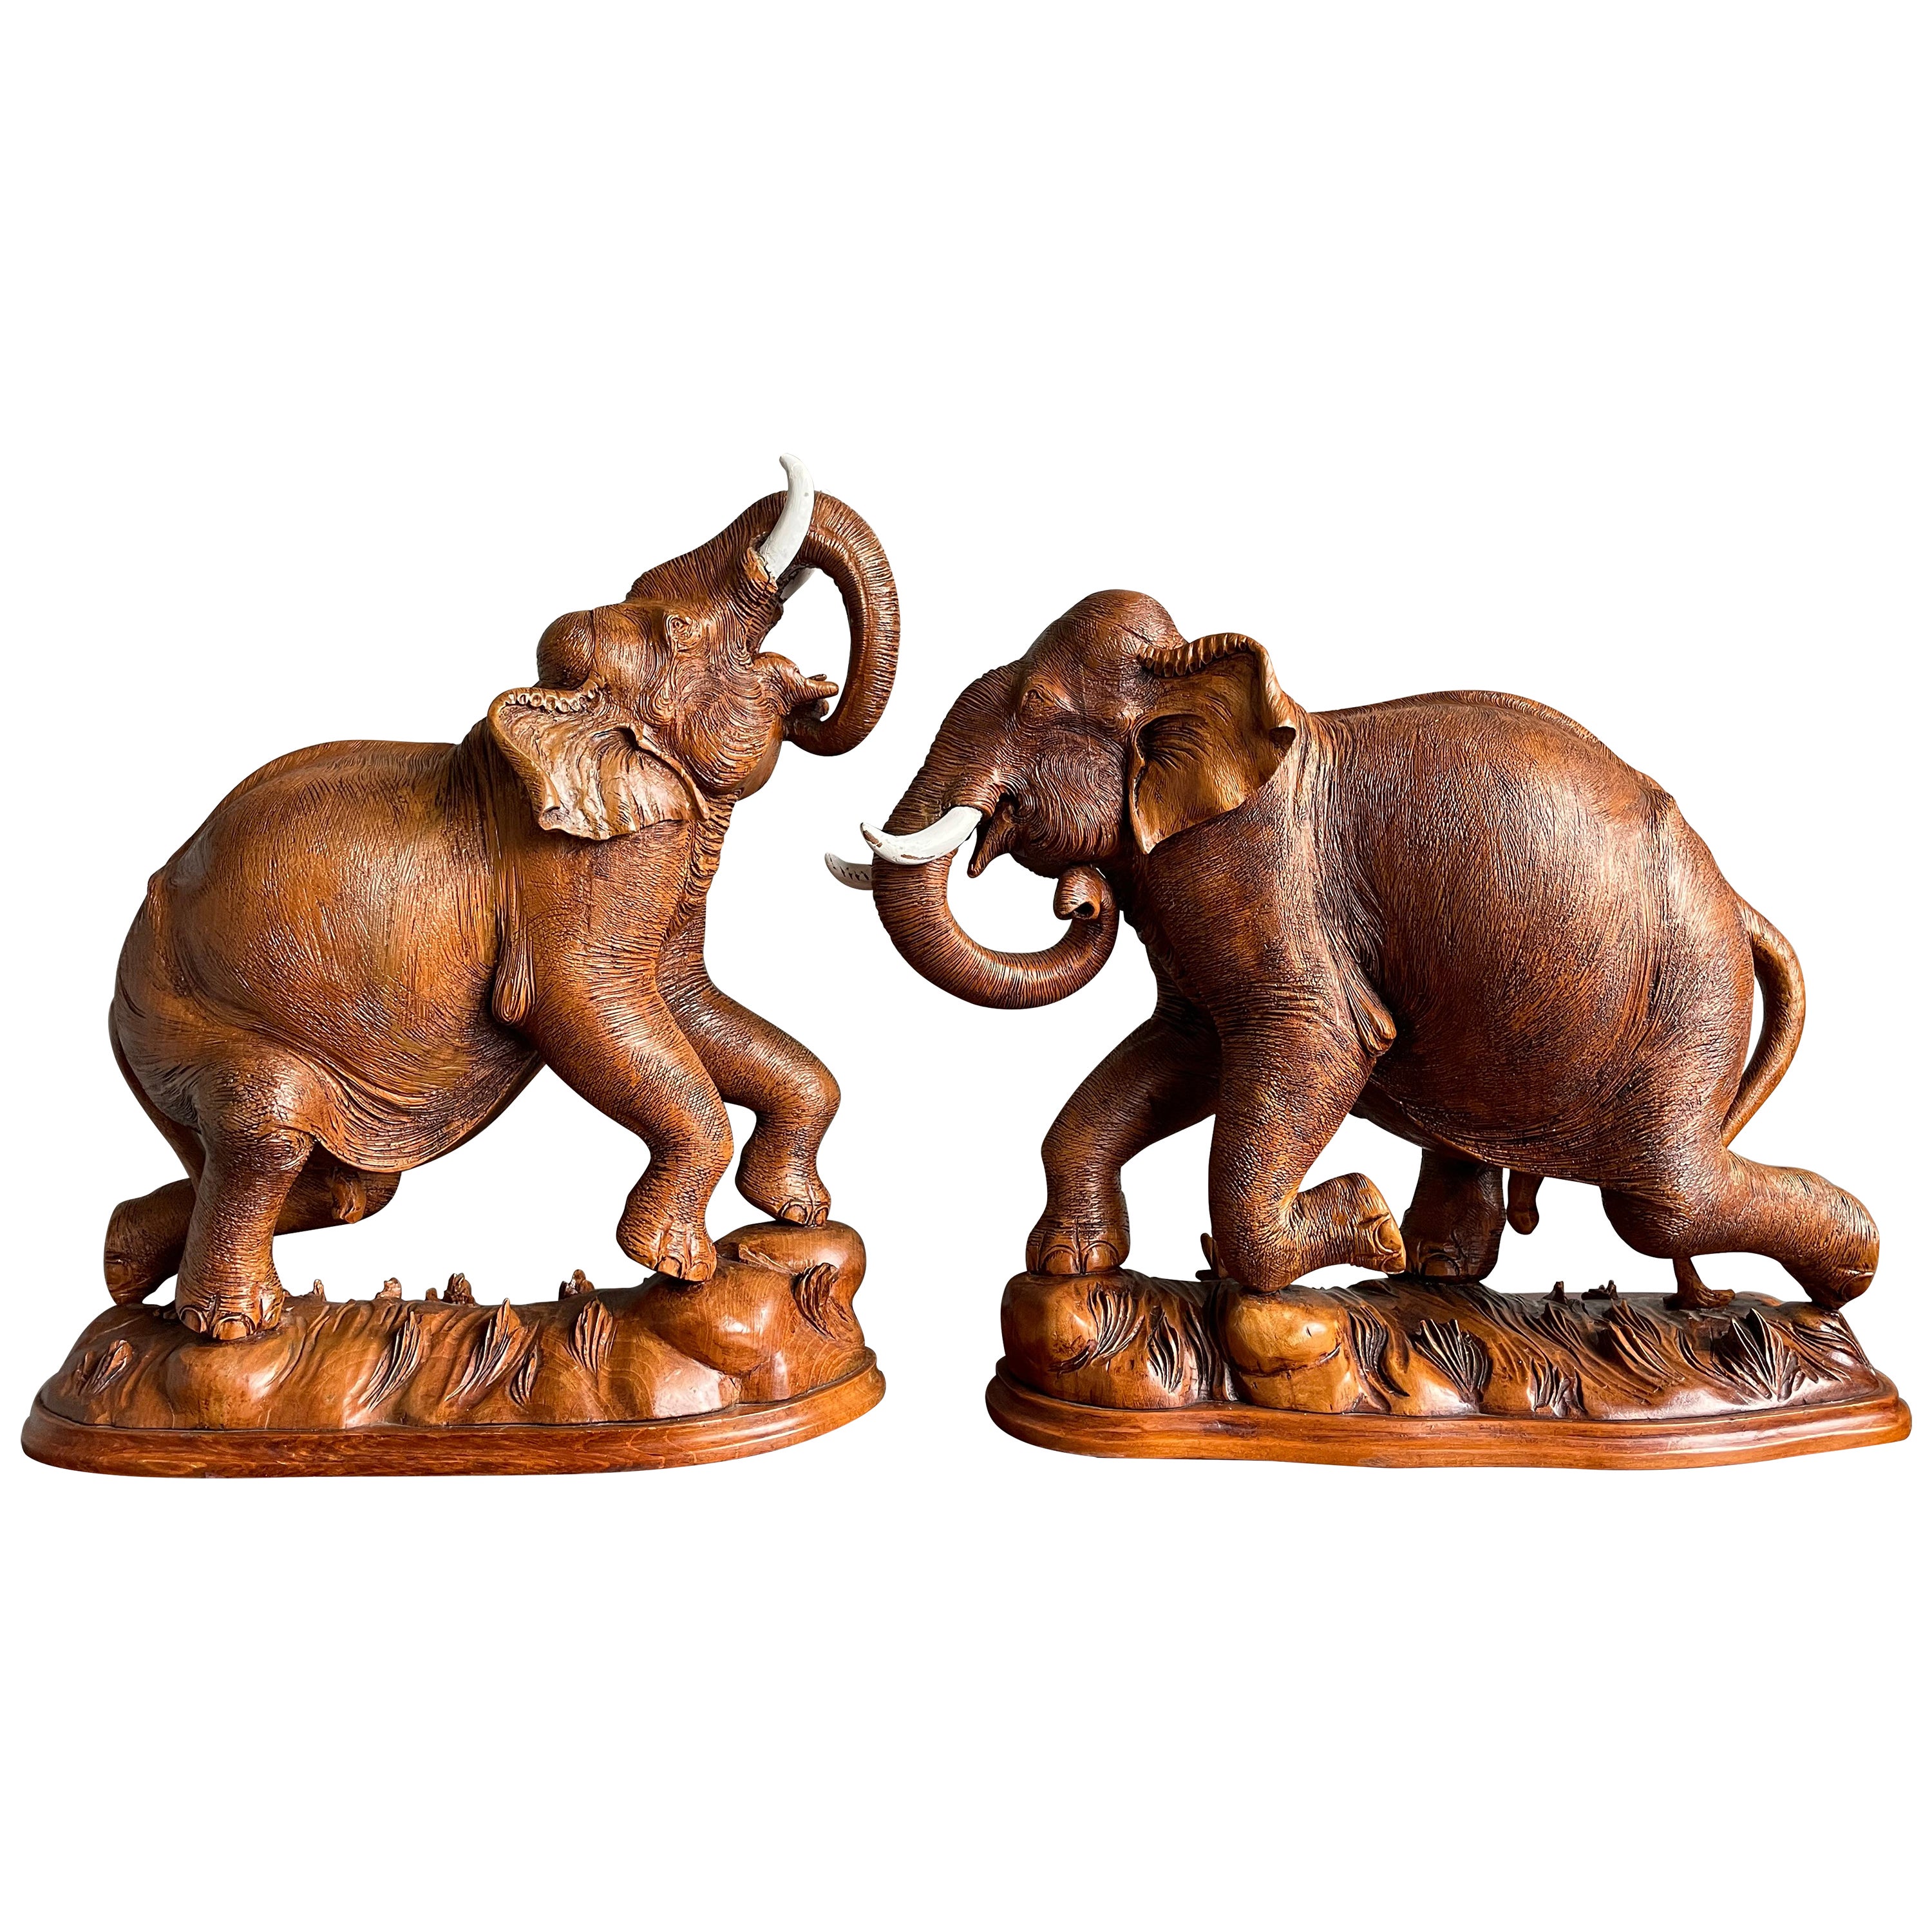 Large & Incredibly Detailed Midcentury Hand Carved Teak Elephant Sculpture Pair